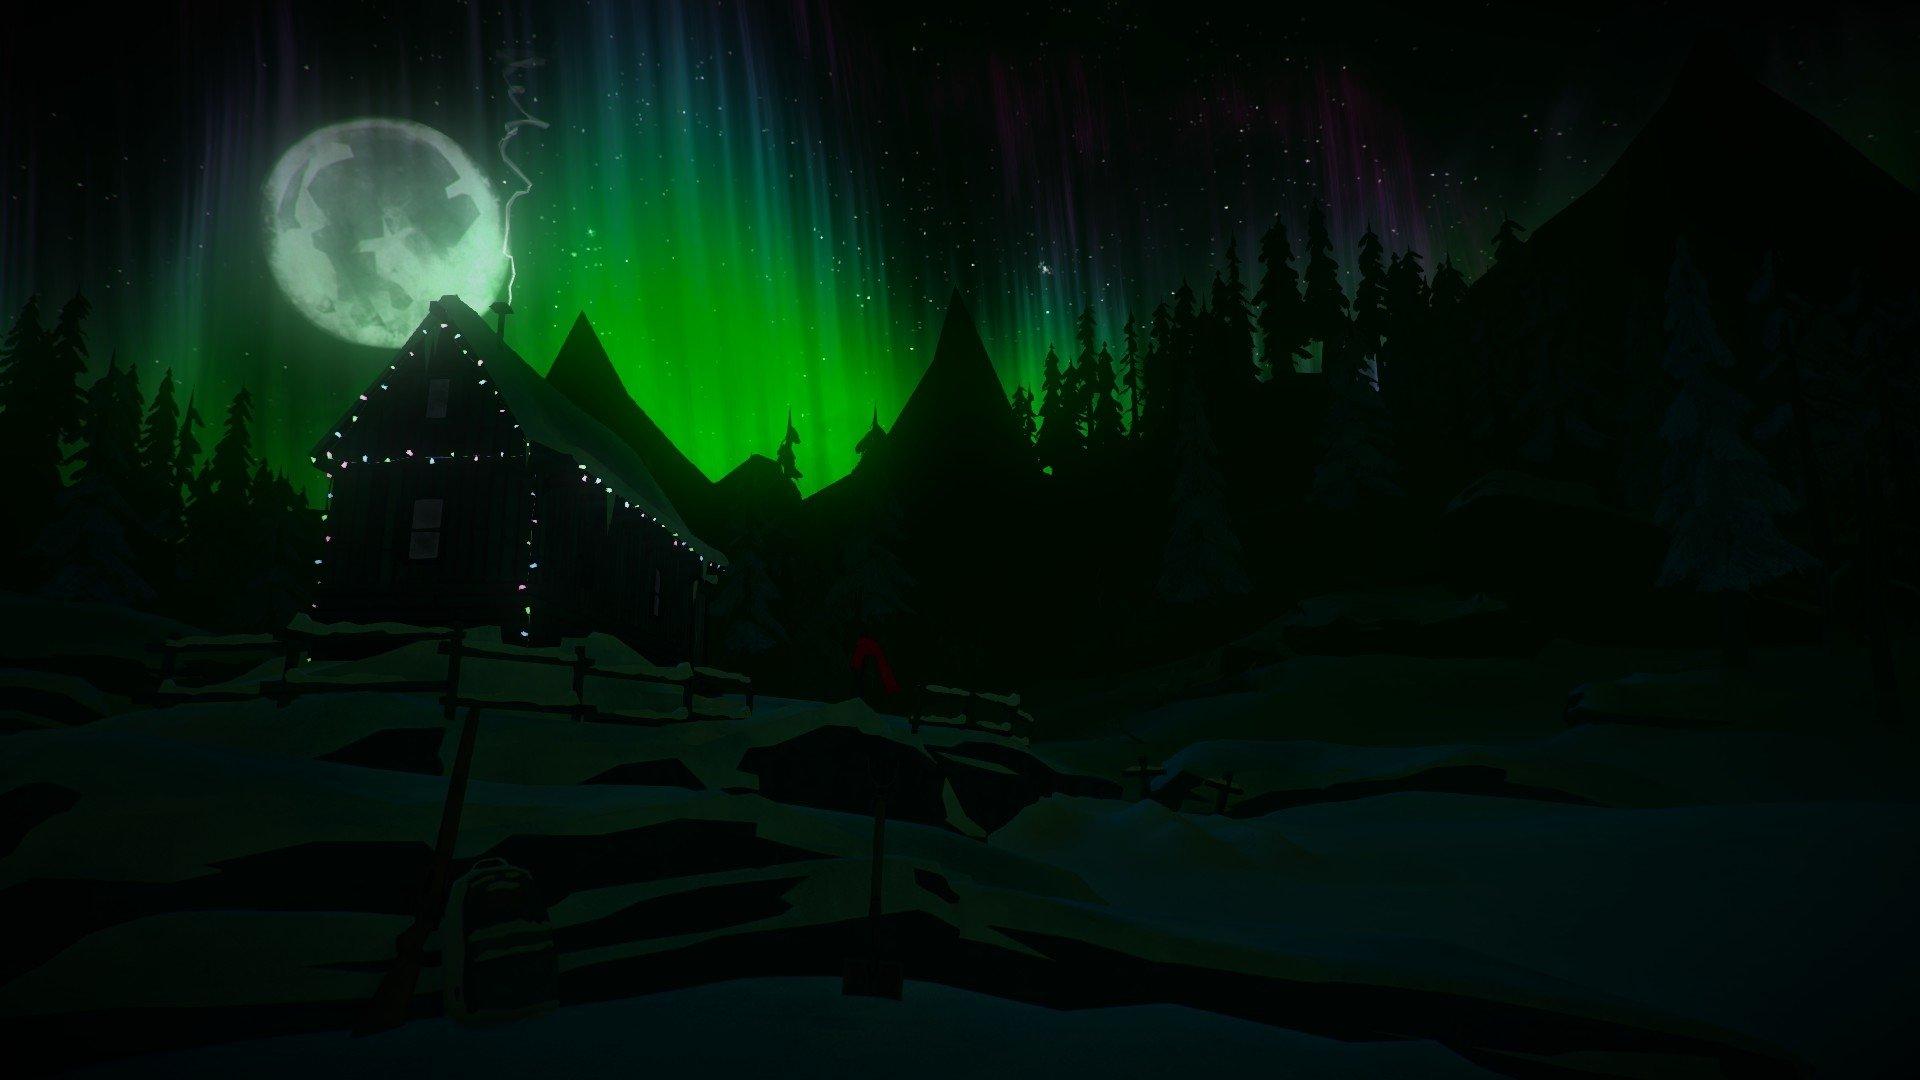 The Long Dark HD Wallpaper and Background Image